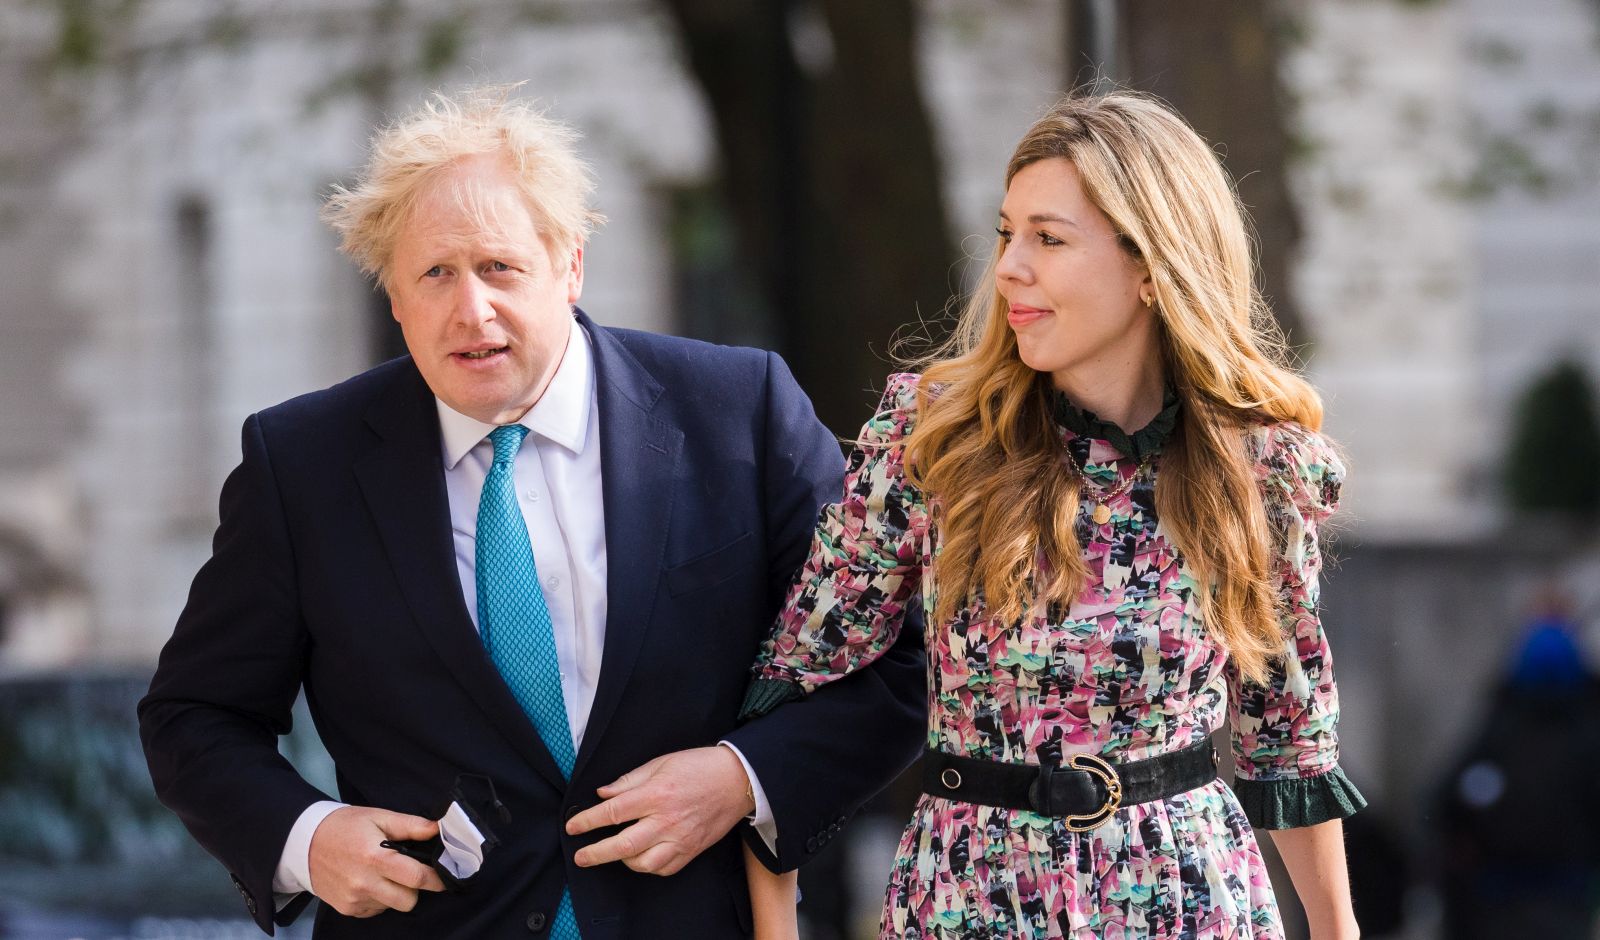 epa09180225 Britain's Prime Minster Boris Johnson (L) and his partner Carrie Symonds arrive at a polling station to cast their votes for the local elections in London, Britain, 06 May 2021. Britons go to the polls on 06 May 2021 to vote in local and mayoral elections.  EPA/VICKIE FLORES